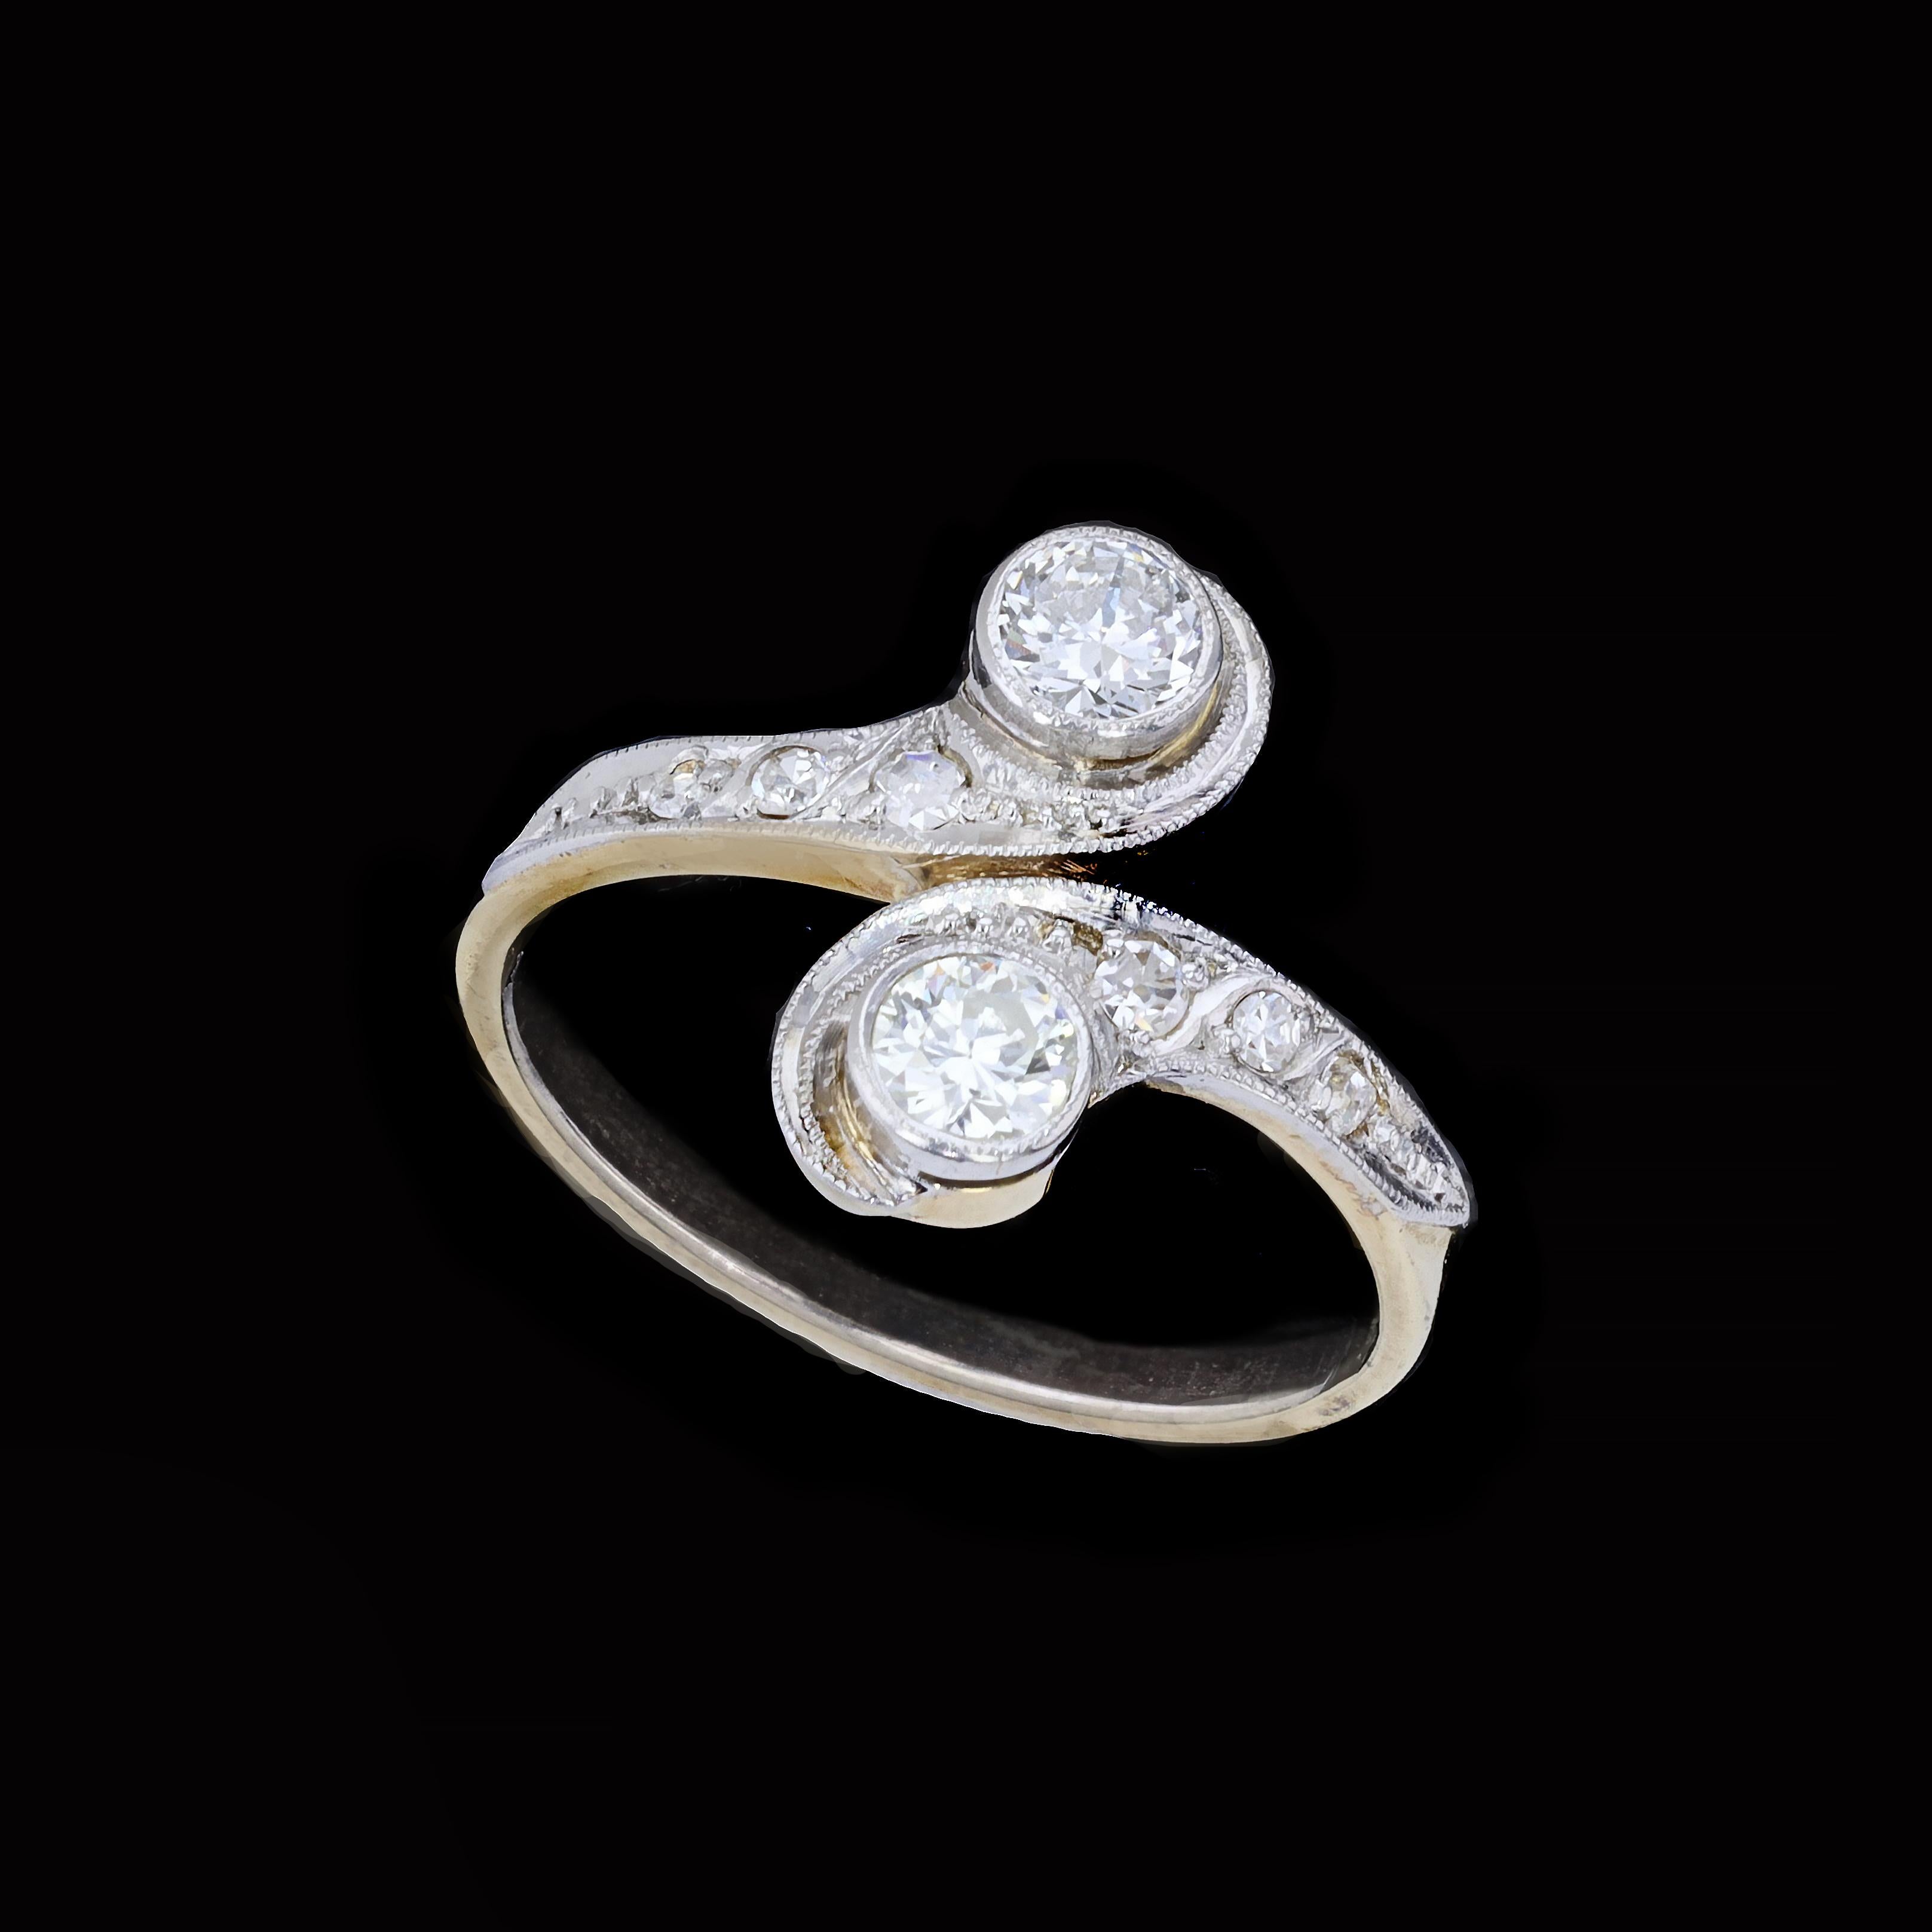 Harmony, beauty, proportion and balance all rolled into a unique package. This Victorian 14K yellow and white gold estate ring is set with two old mine cut diamonds that weigh approximately 0.70ct. The color of the diamonds is I with VS clarity. The